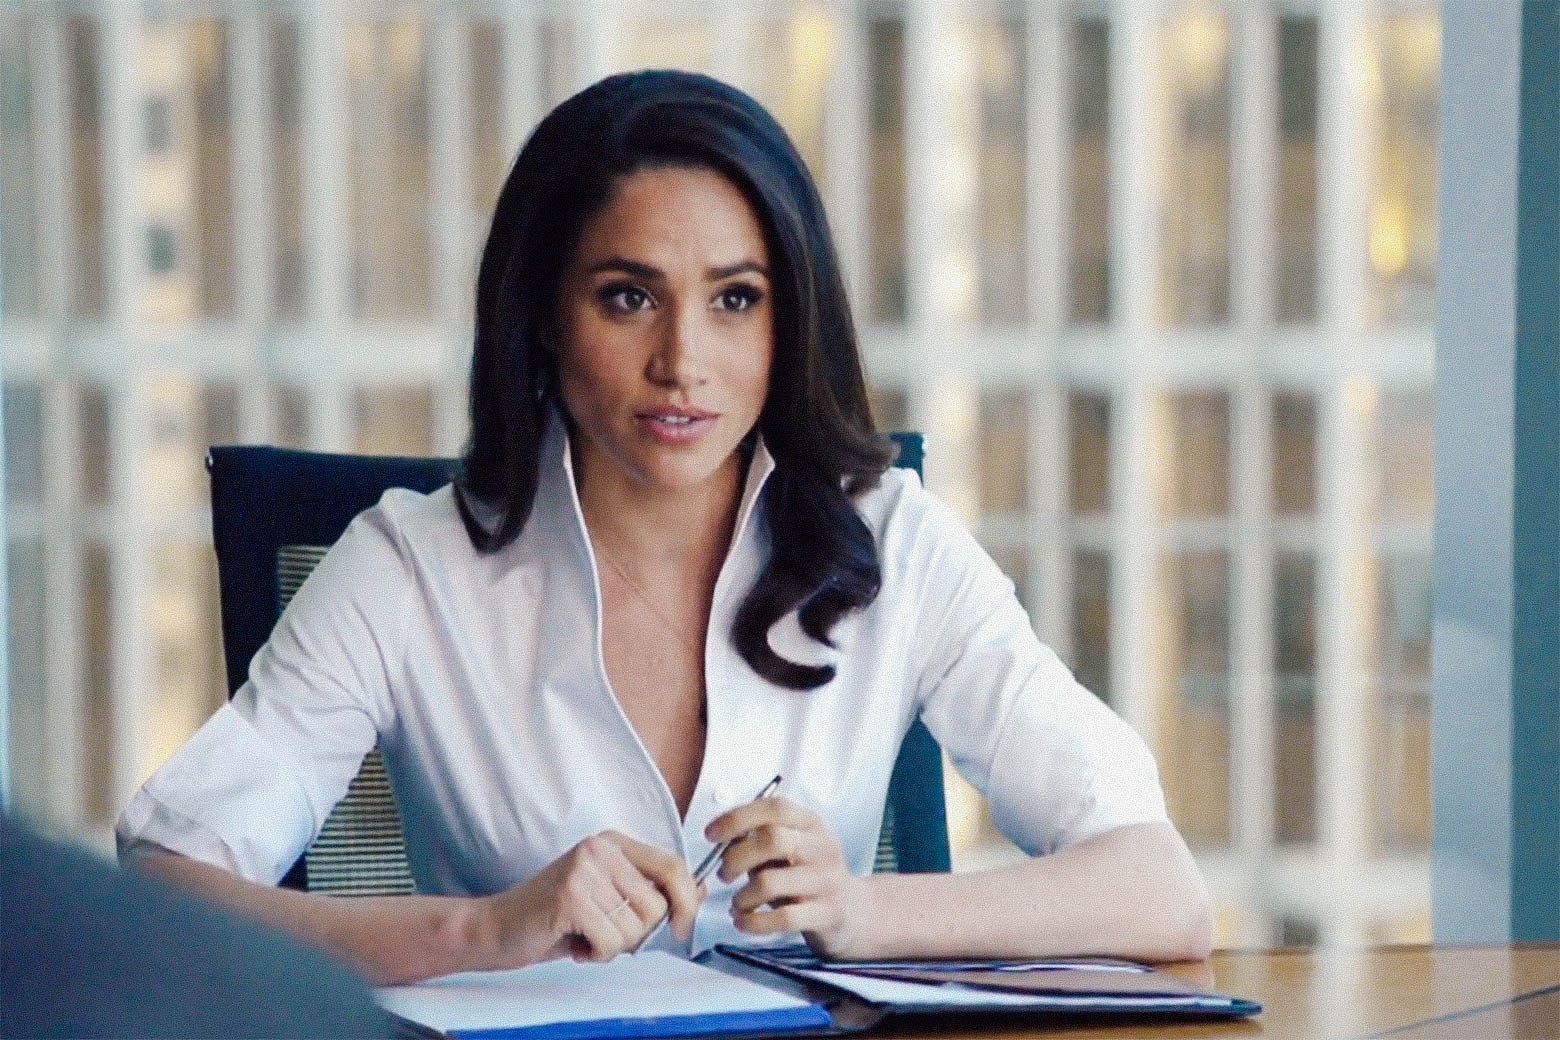 Meghan Markle sits at a desk with an open notebook in front of her. She's wearing a white blouse.